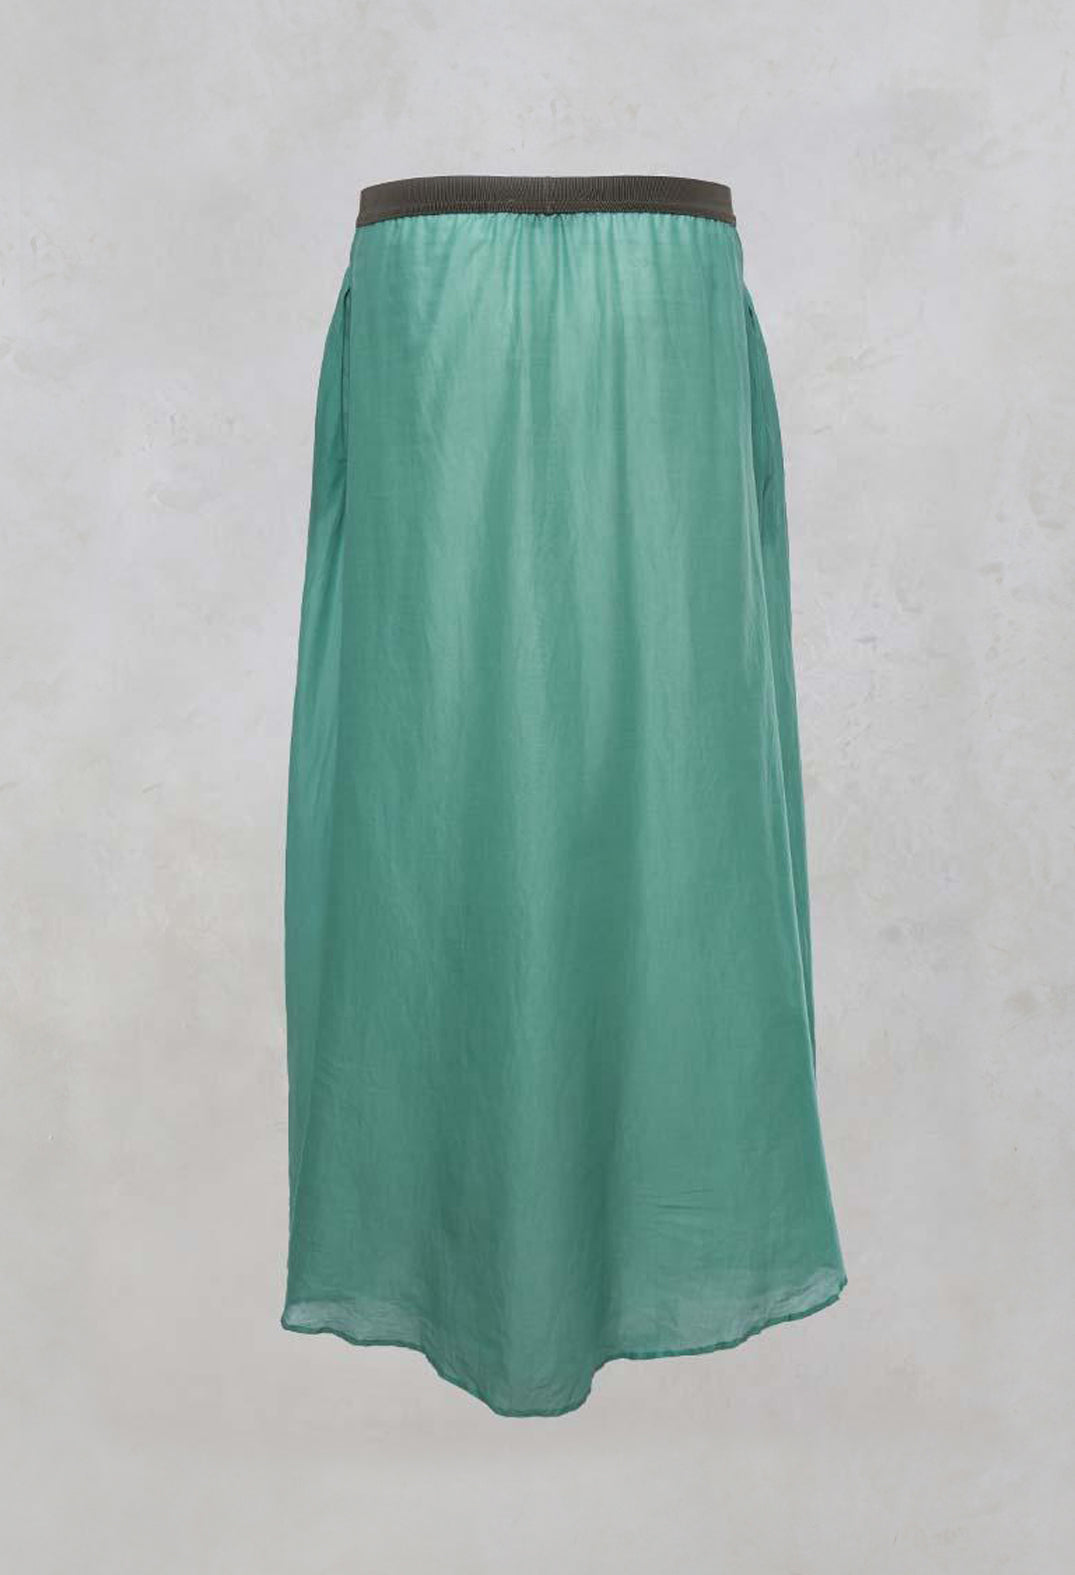 Layered Maxi Skirt with Contrast Waistband in Emerald